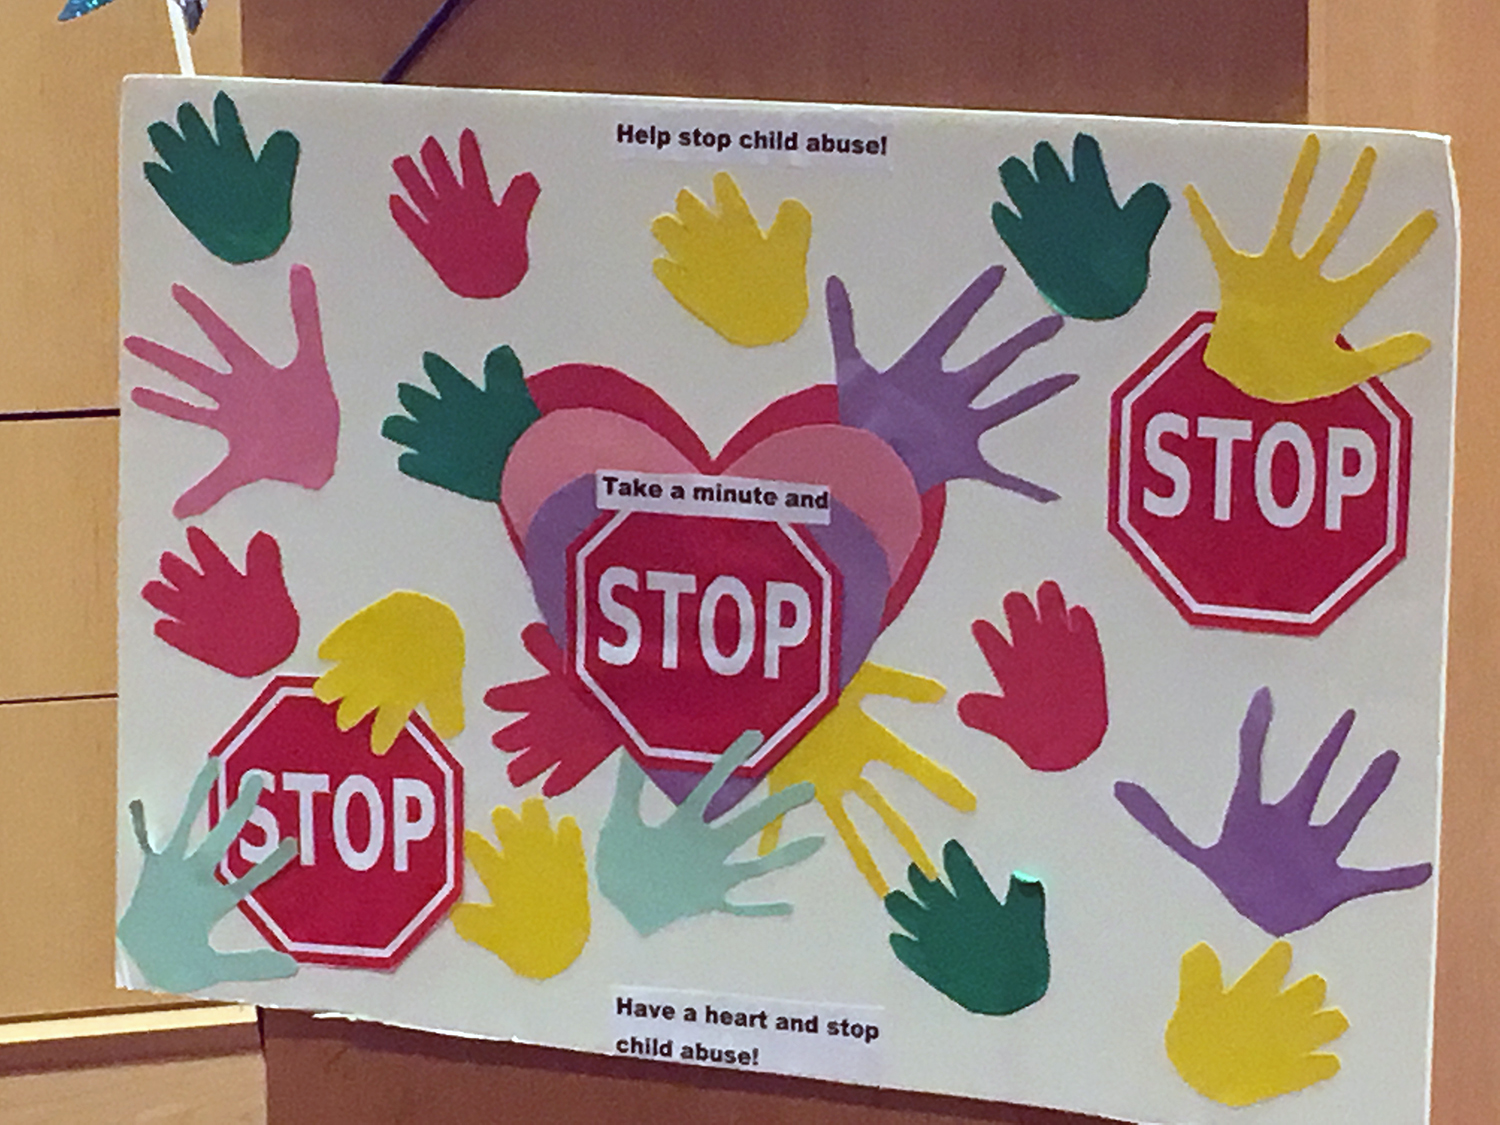 Children's display as part of an effort to raise awareness of child abuse and neglect